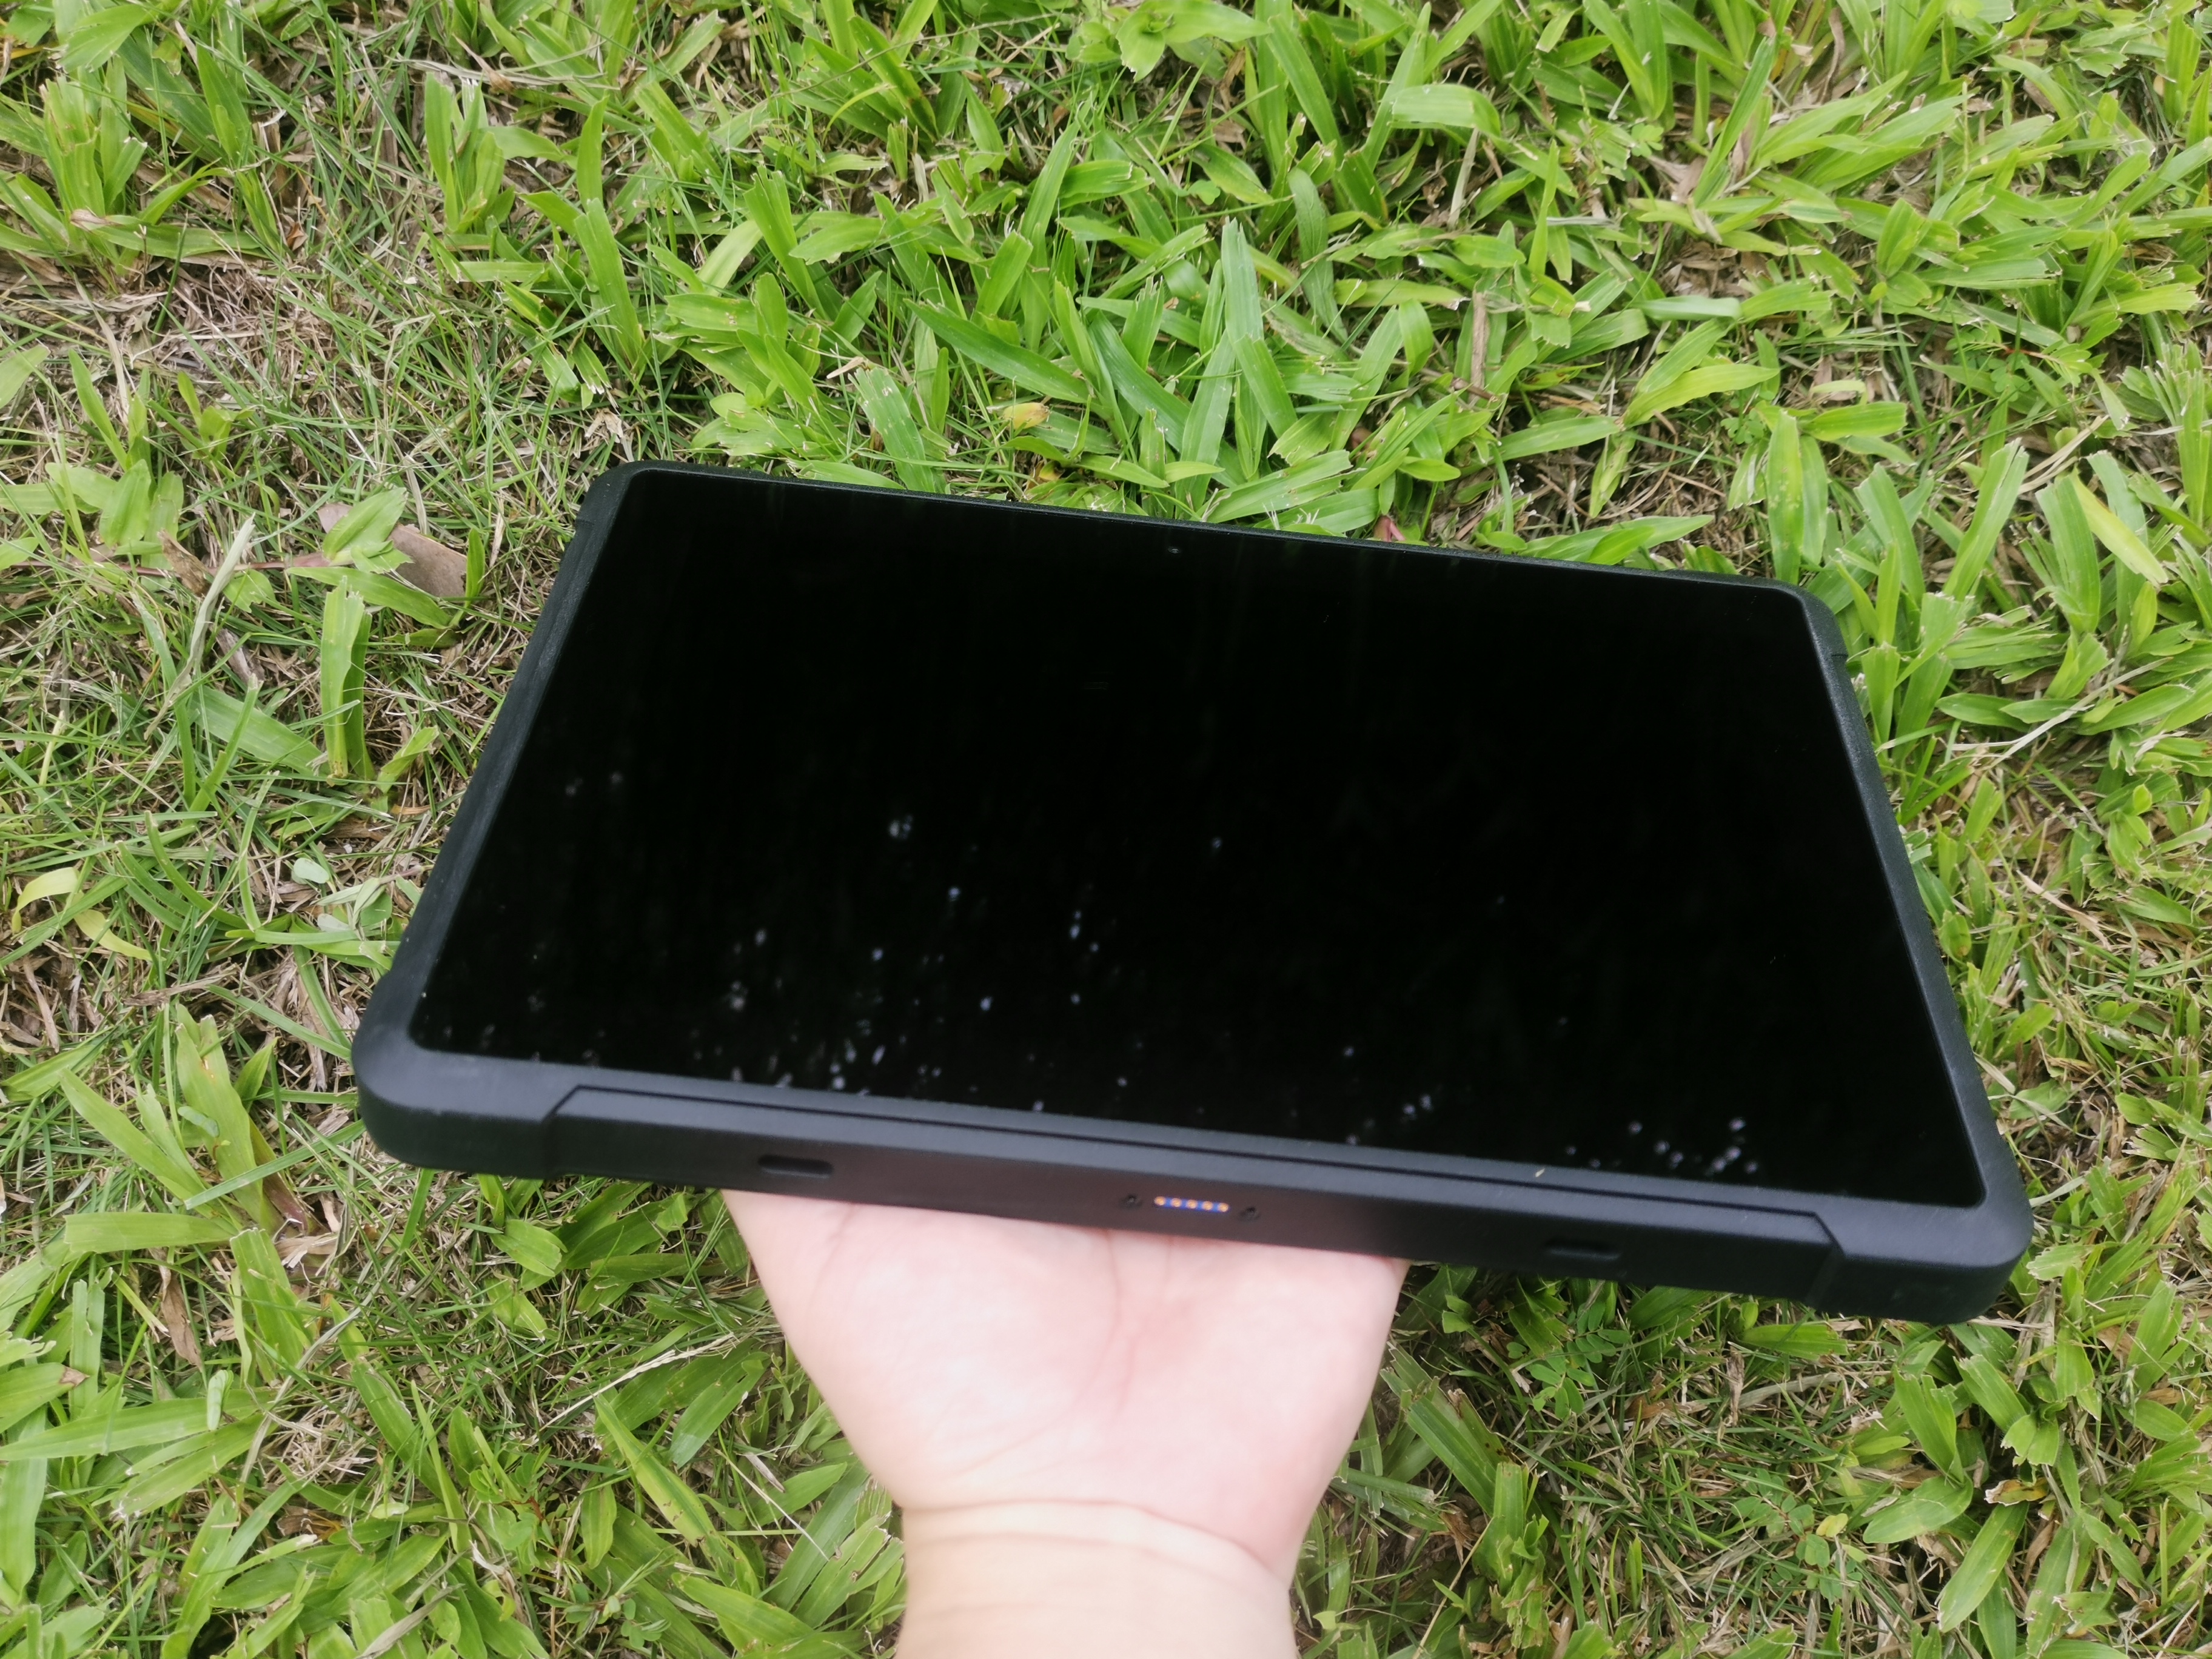 Do rugged tablets or industrial tablets have medical device capabilities?